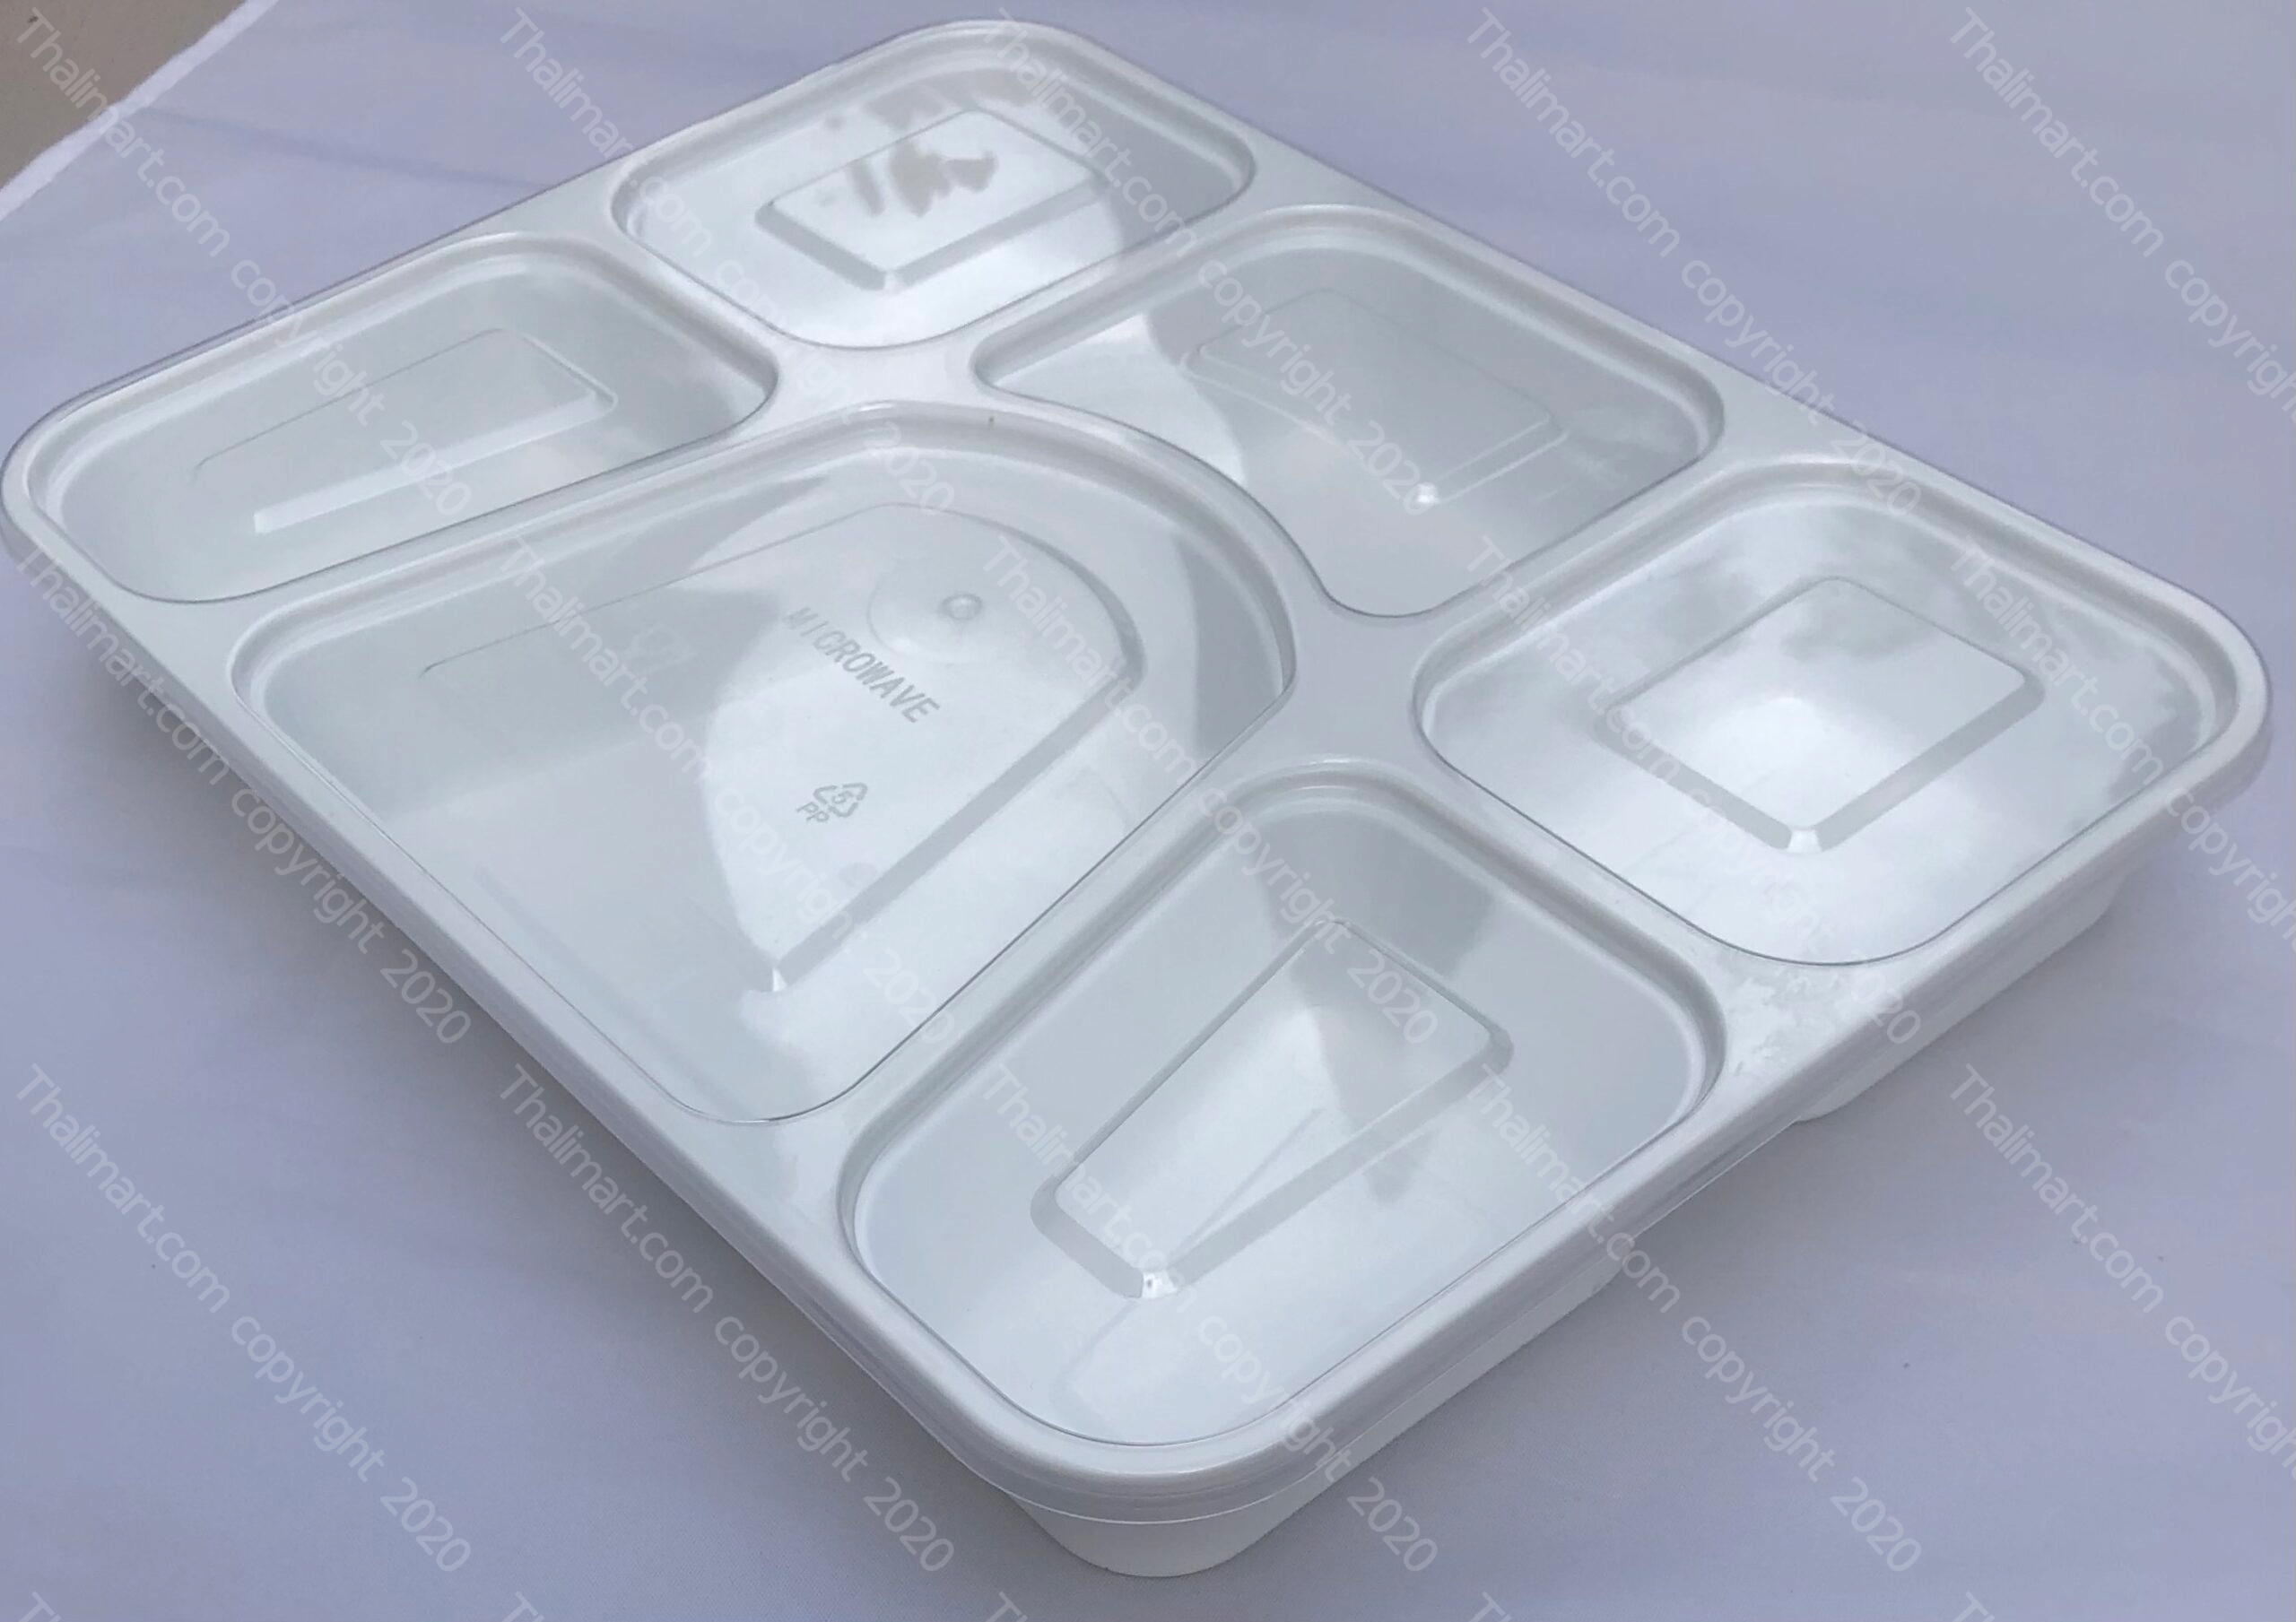 https://www.desiclik.com/images/P/6%20compartment%20food%20grade%20plastic%20plate%20with%20lid%20microwave%20safe%20leak%20resistant%20snap%20on%20tight%20lid%206.jpg